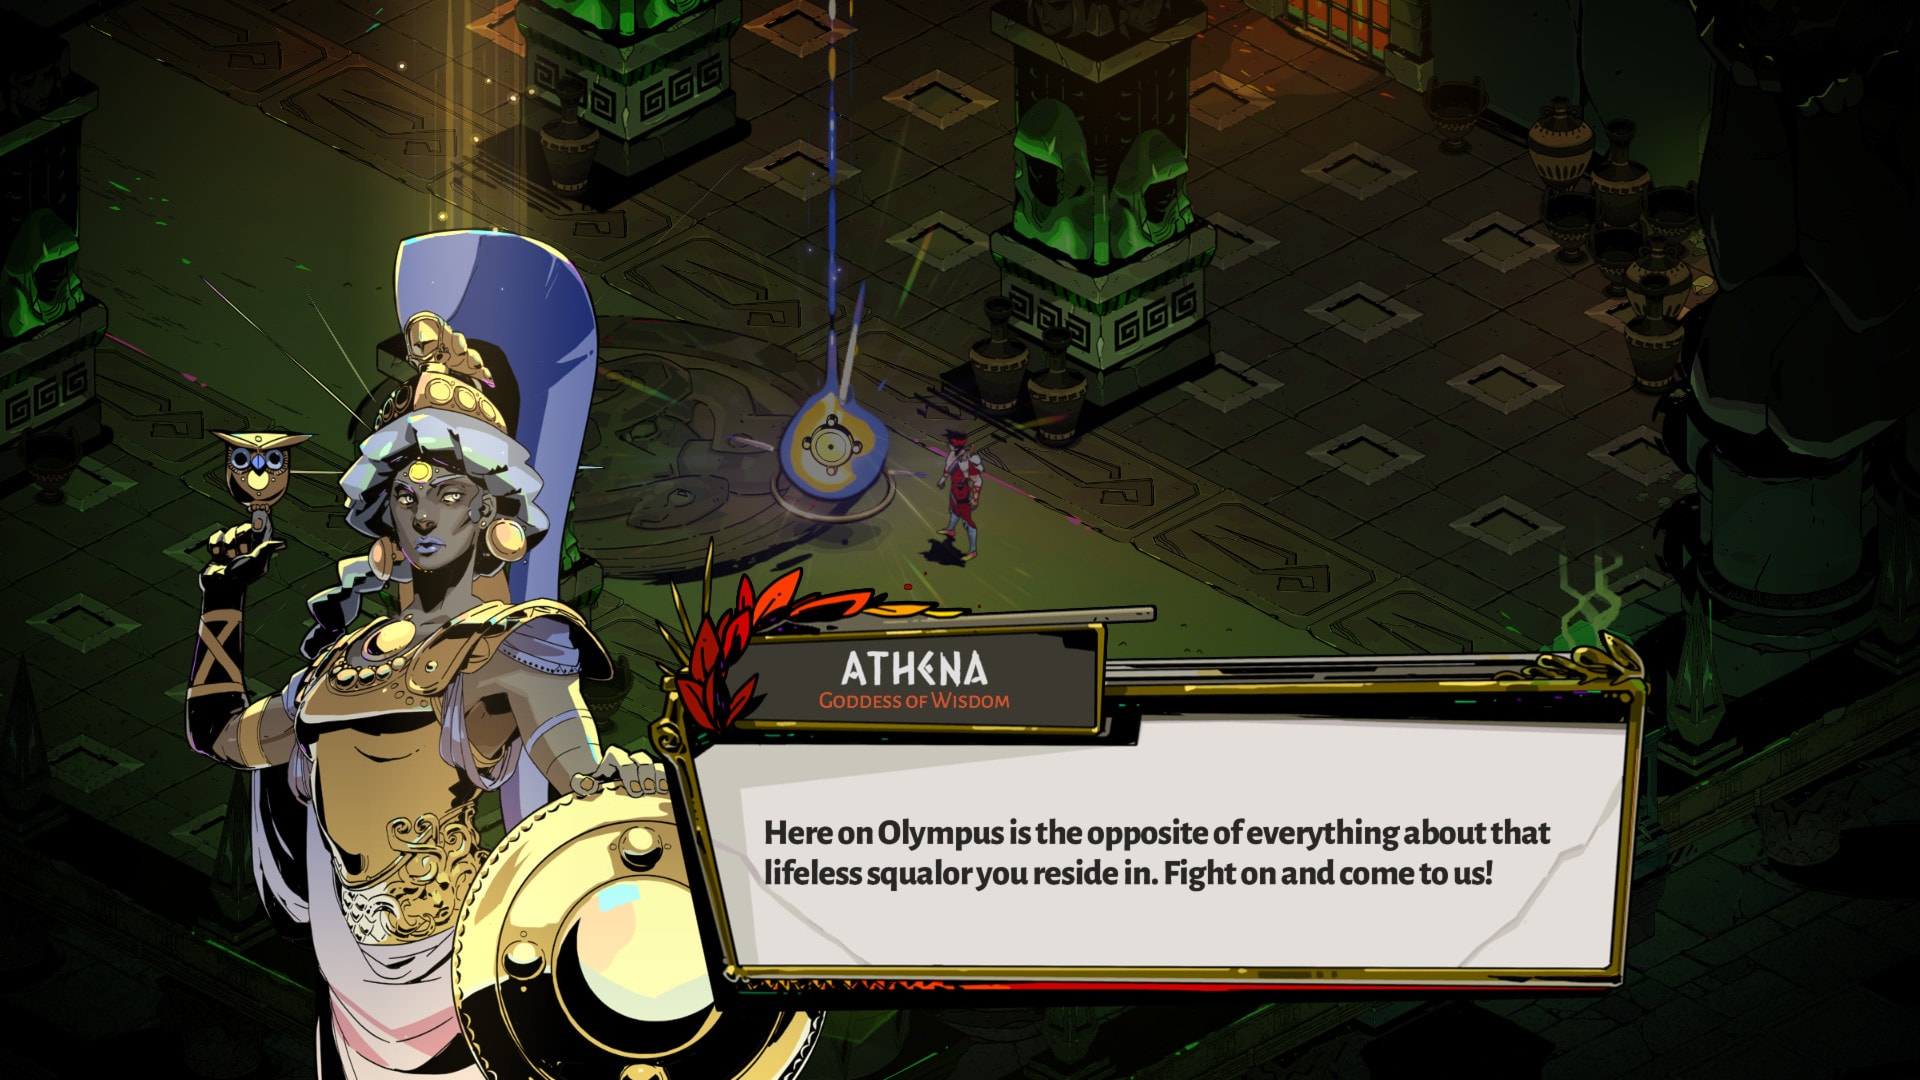 Screenshot of Athena from Hades, who Marin M. Miller voices, saying "here on olympus is the opposite of everything about that lifeless squalor you reside in. Fight on and come to us!"